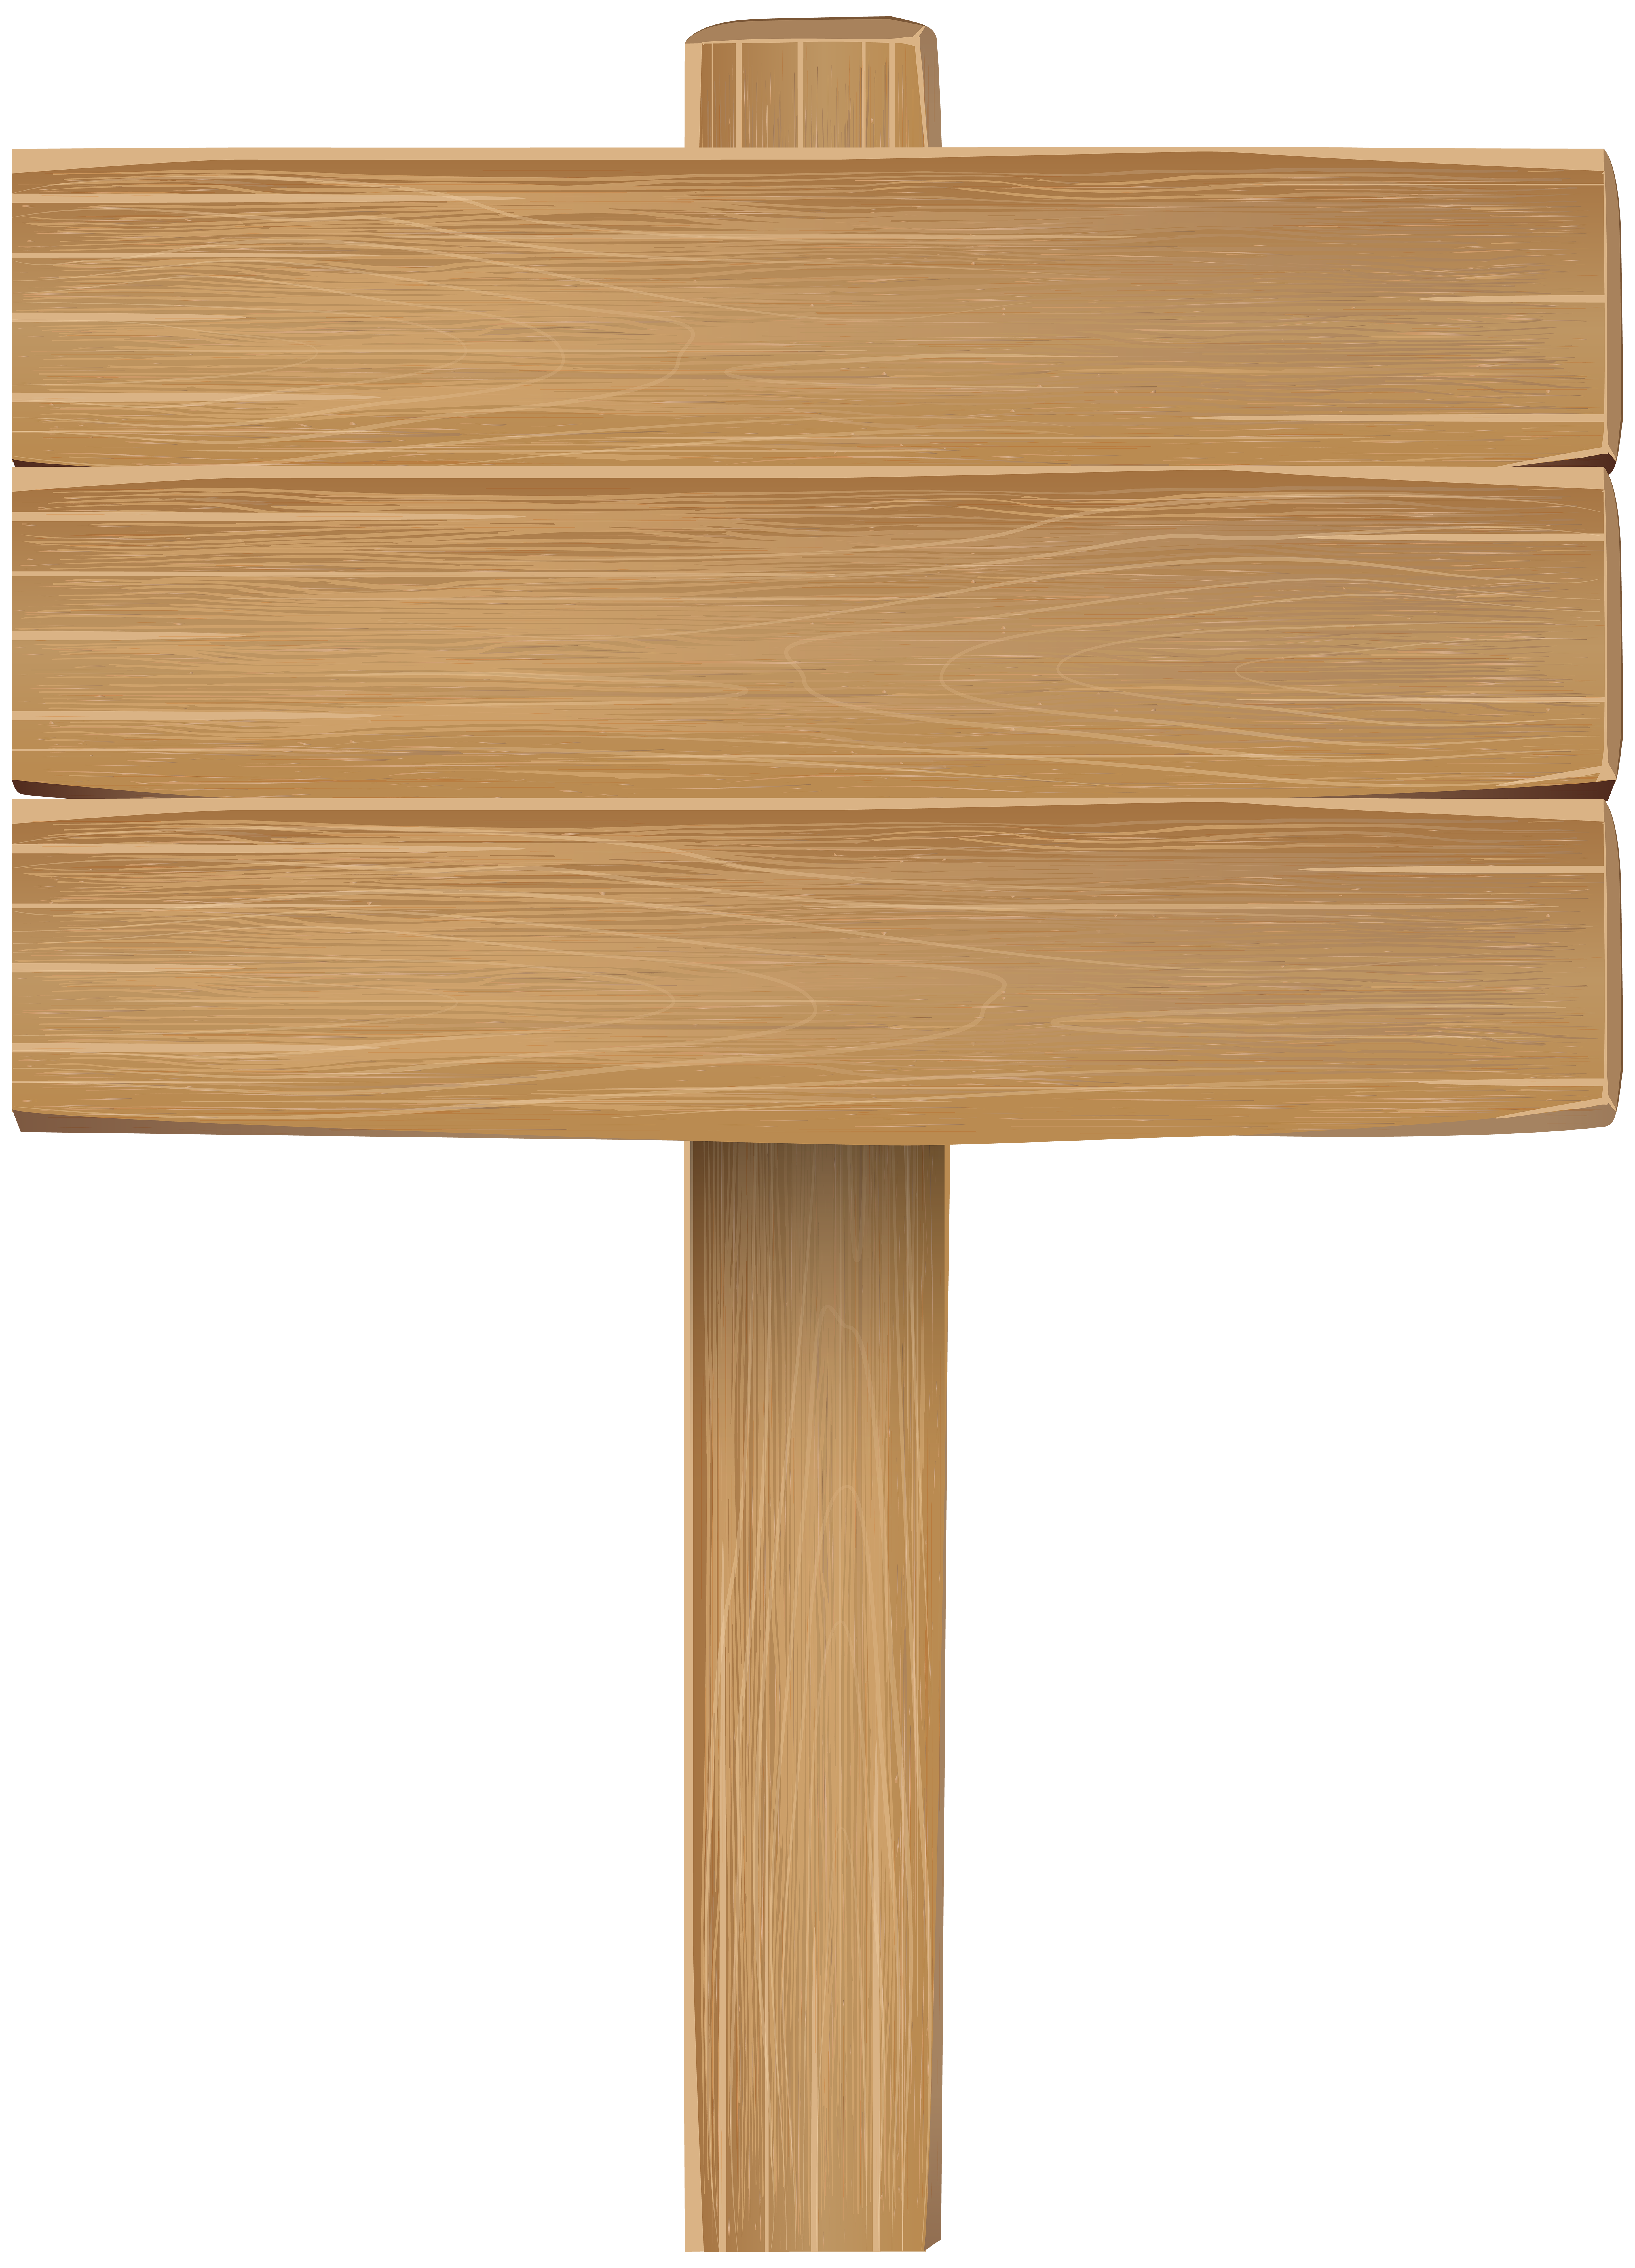 Wooden Sign PNG Clipart Image.